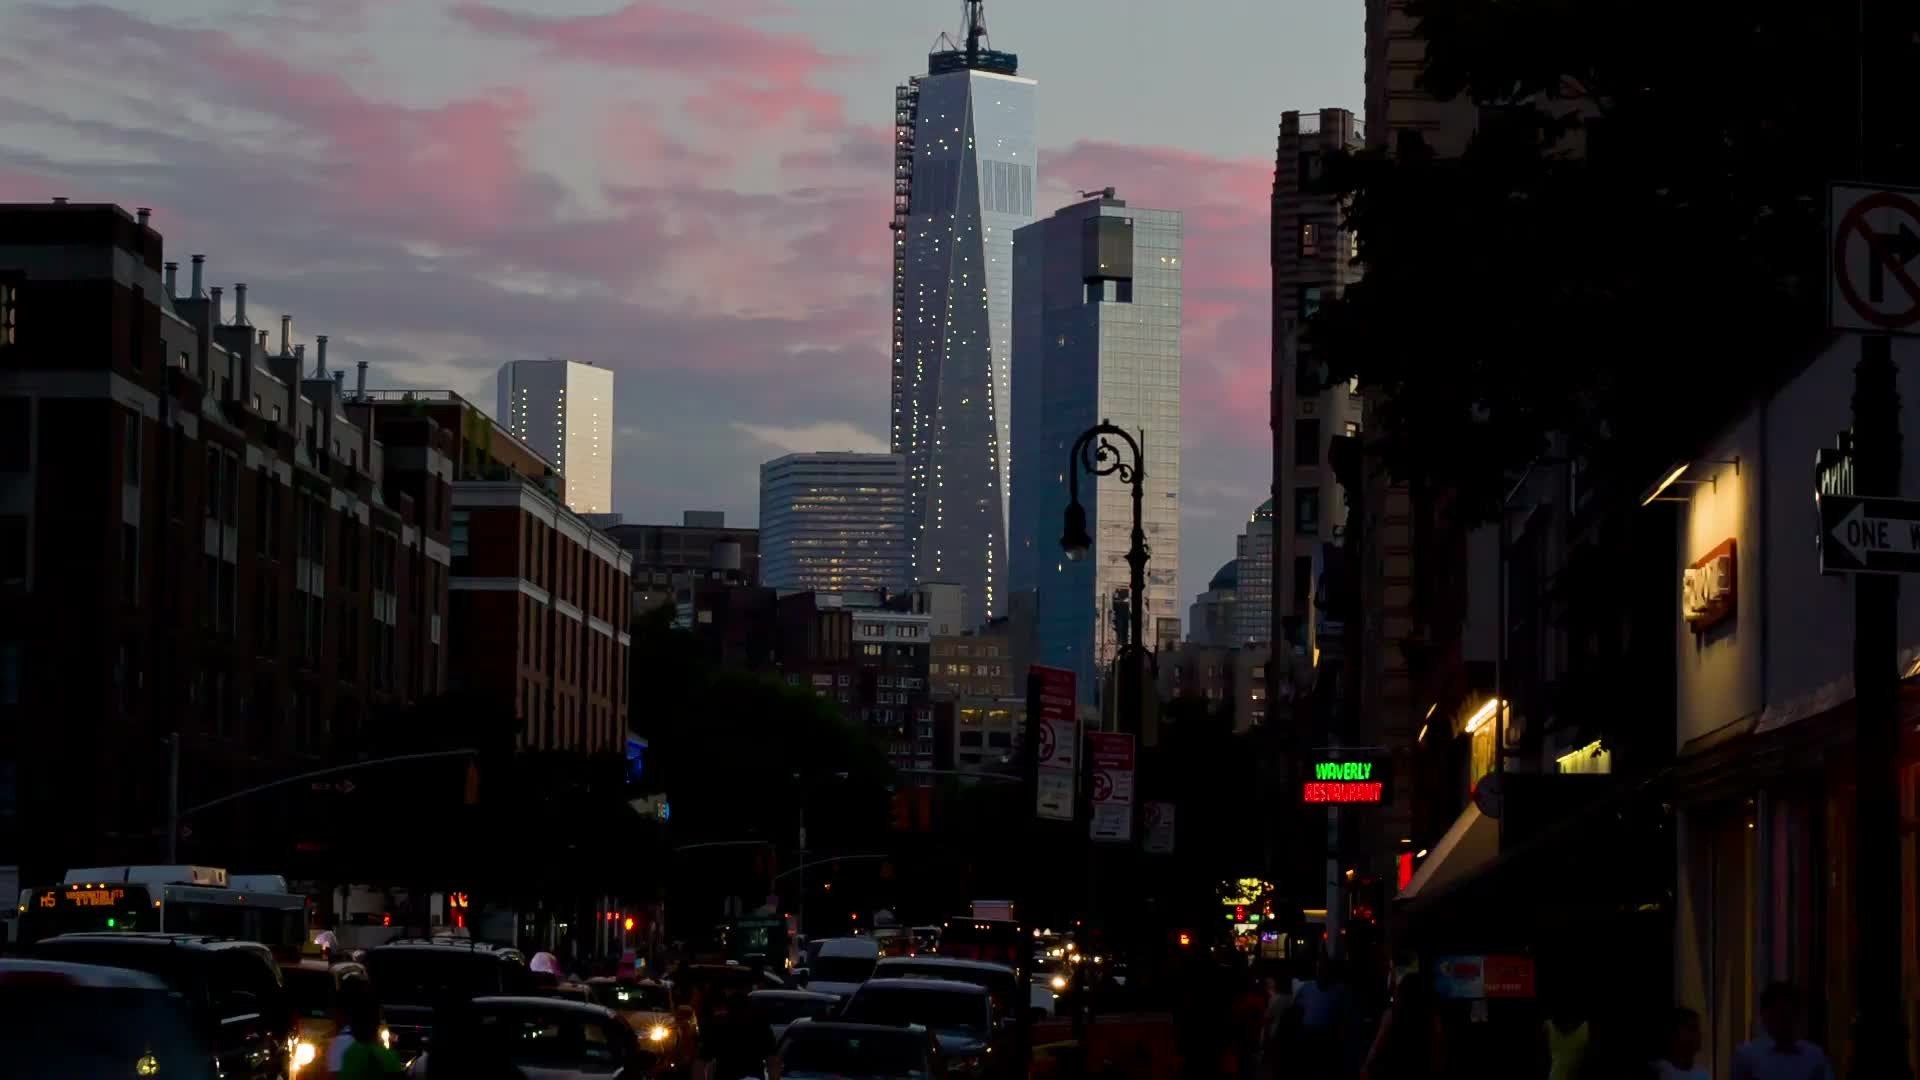 Freedom Tower at dusk early evening 6th Avenue - pink sunset sky Manhattan NYC